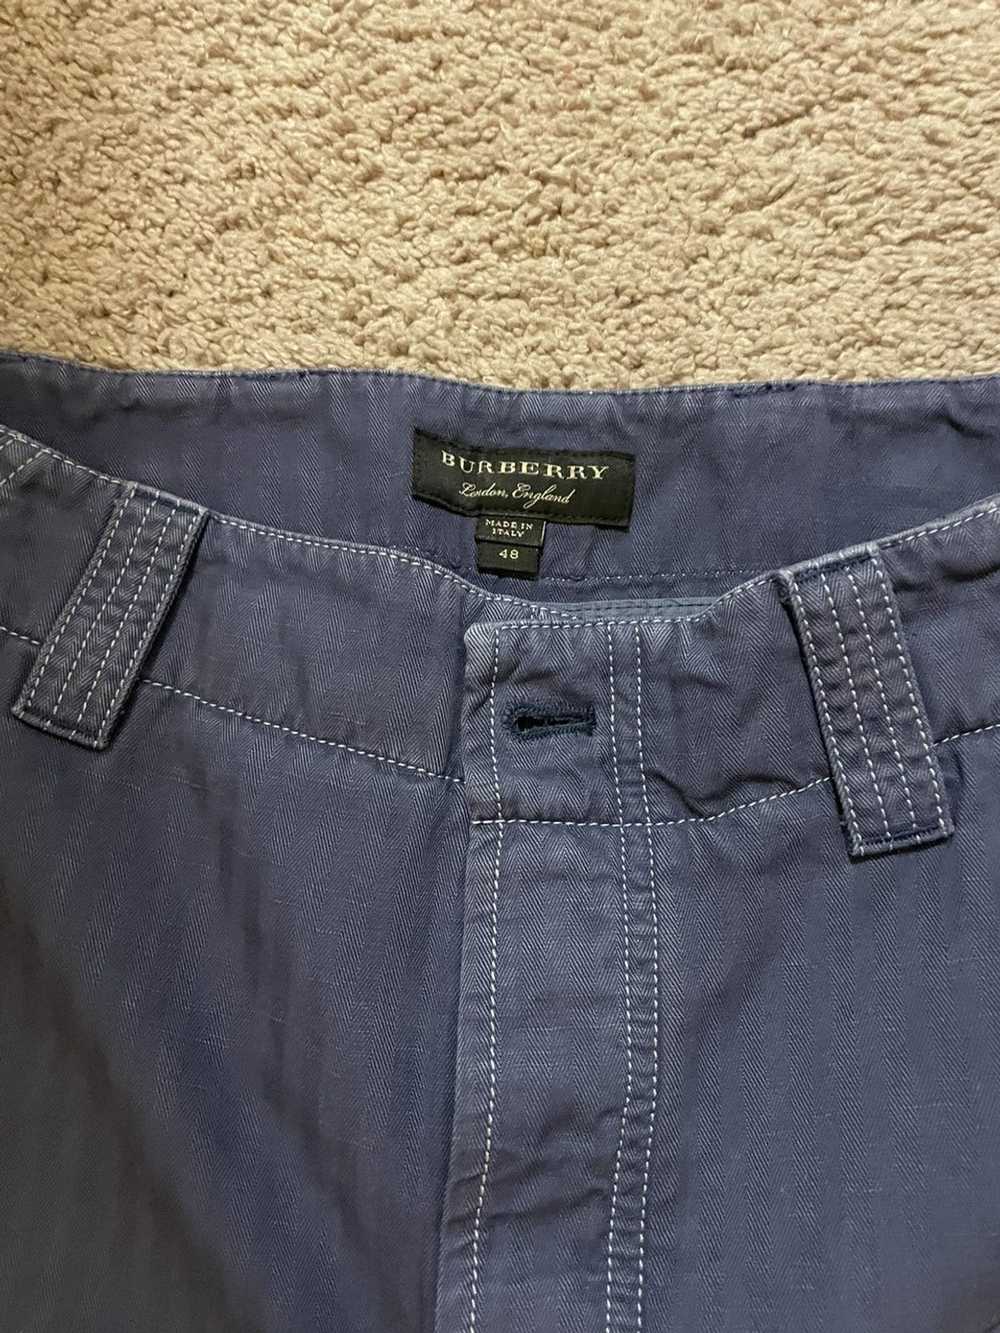 Burberry Thomas Burberry Casual Pants by Burberry - image 2